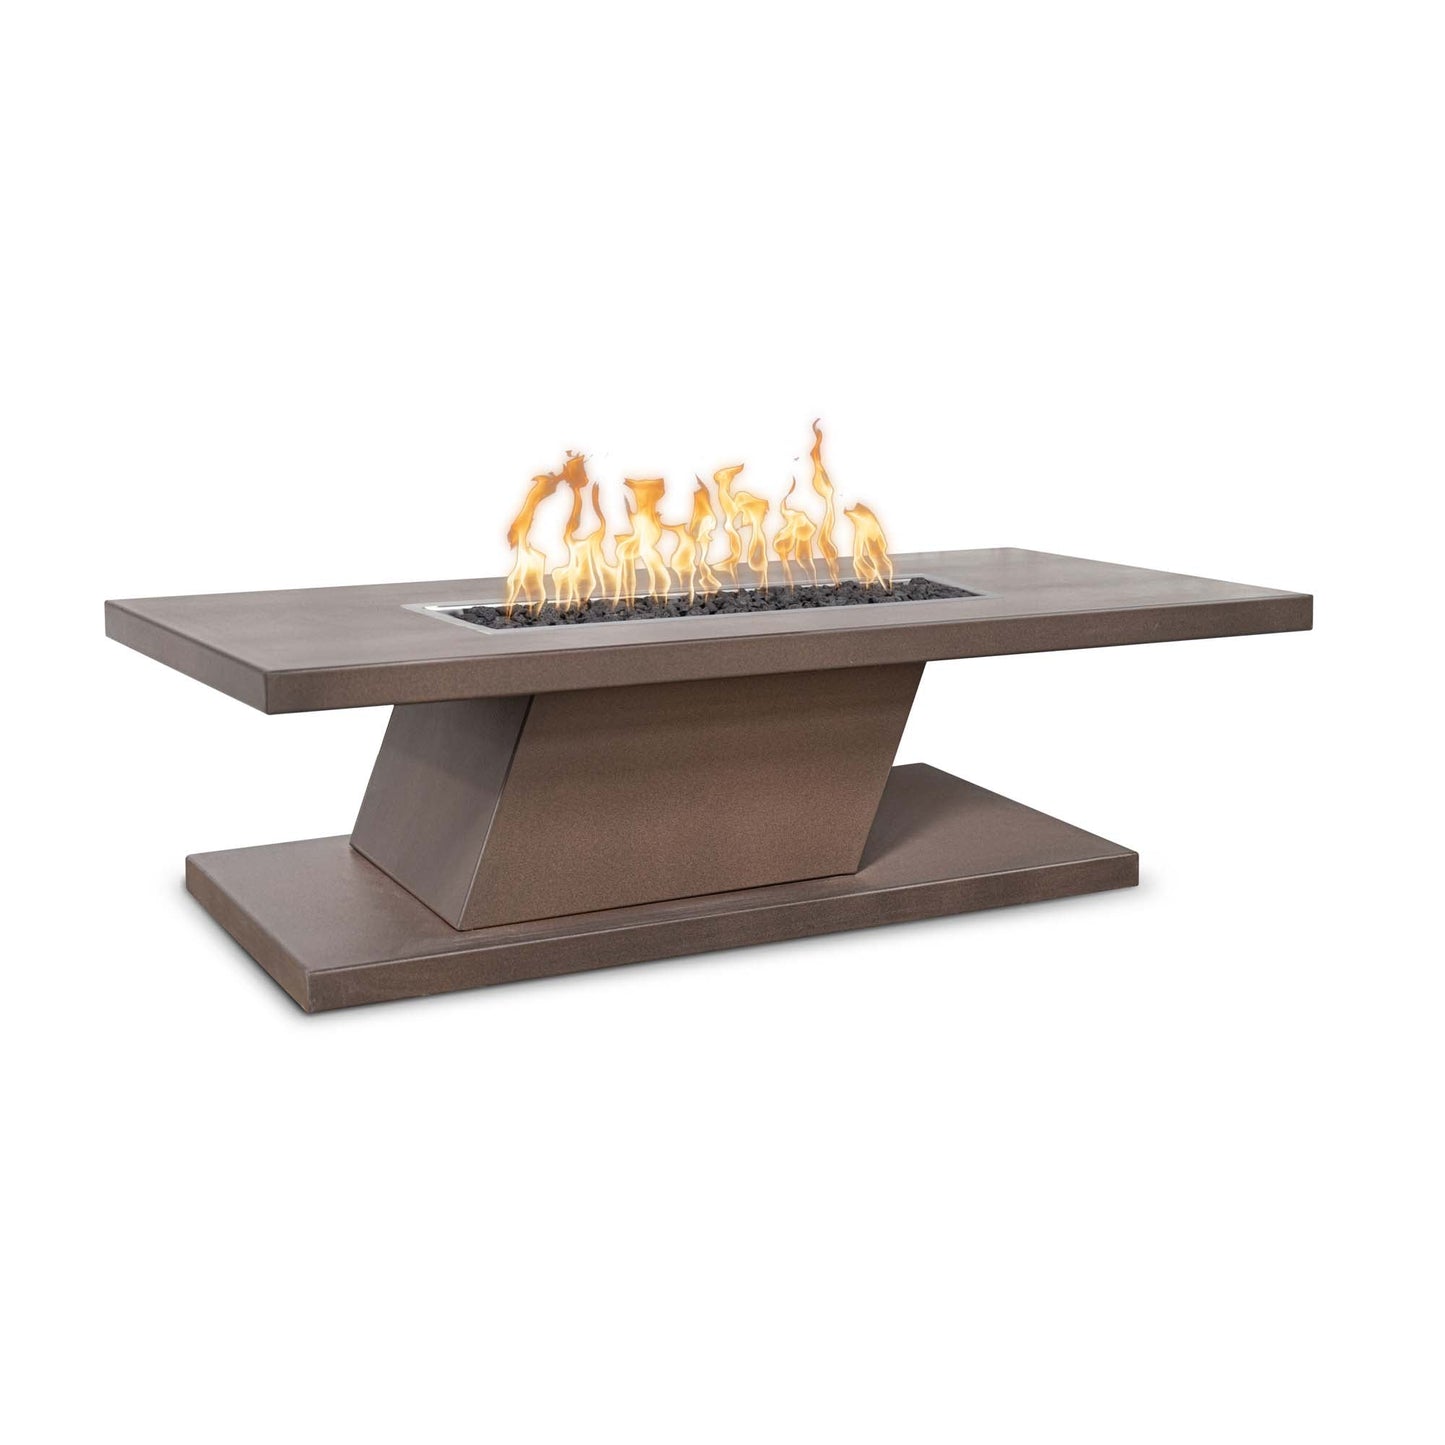 Imperial Fire Pit Table 60" - 15" Tall - Match Lit